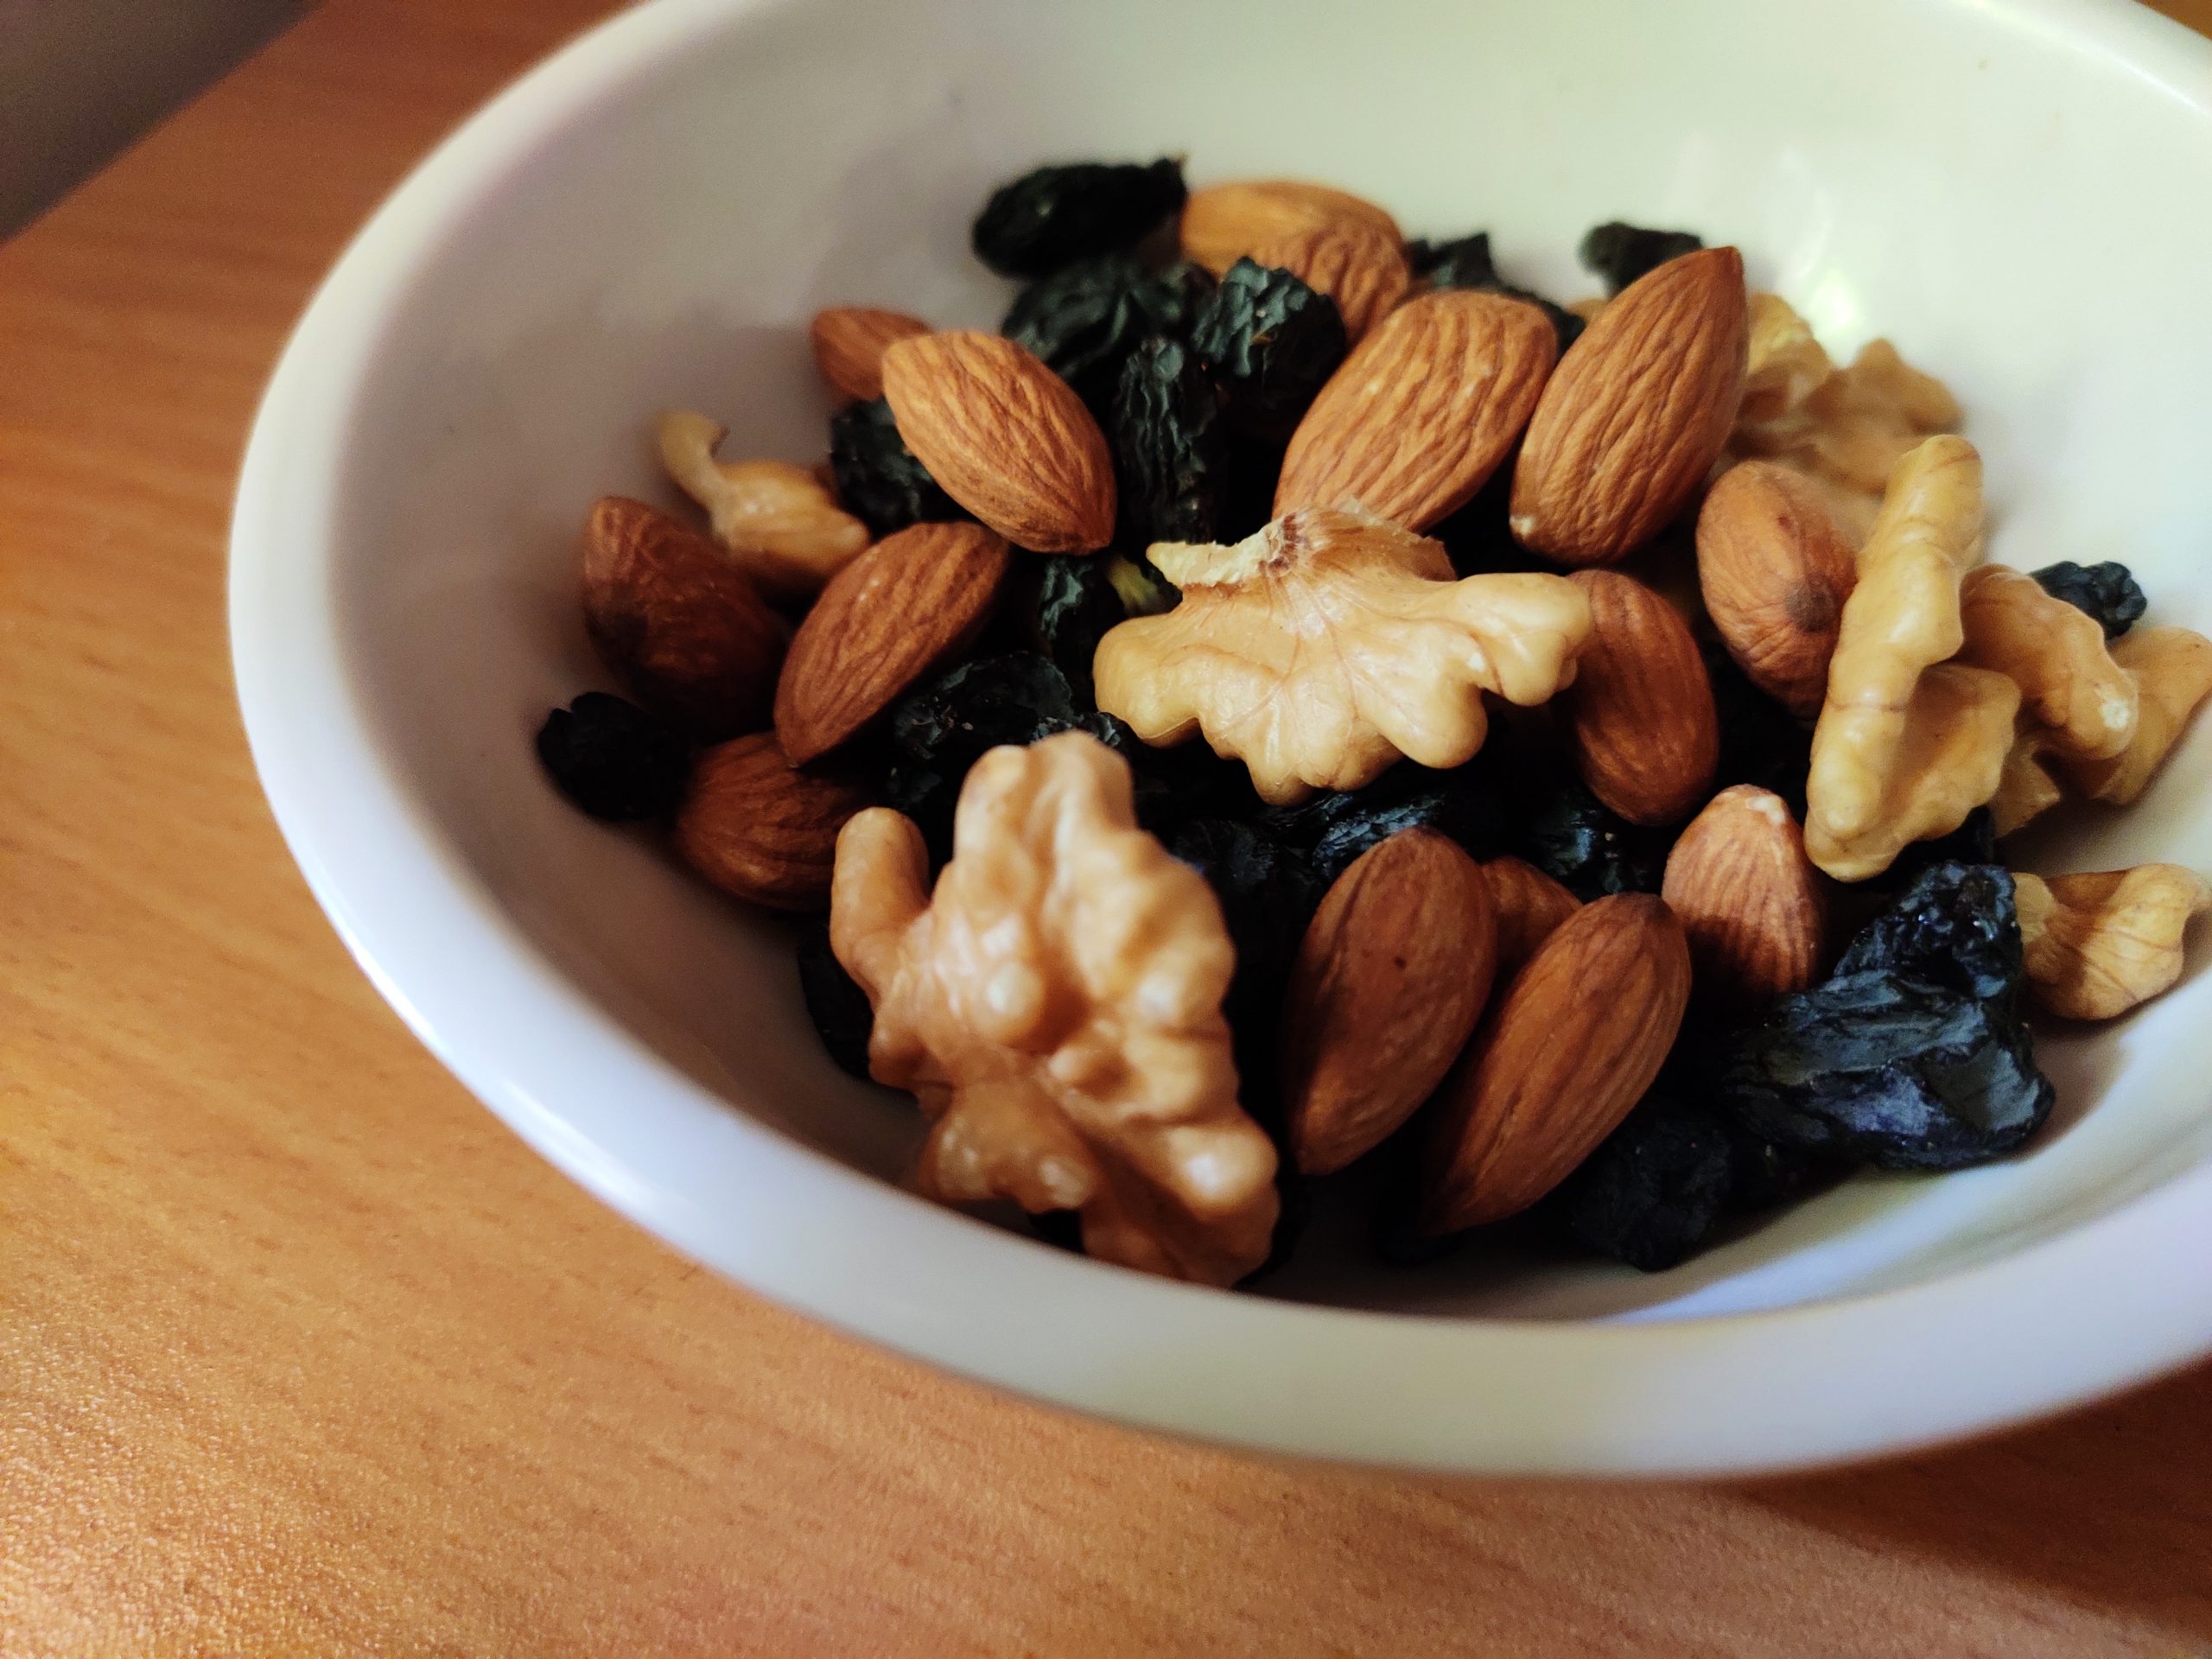 Can Snacking On Mixed Nuts Support Weight Loss And Satiety Levels?